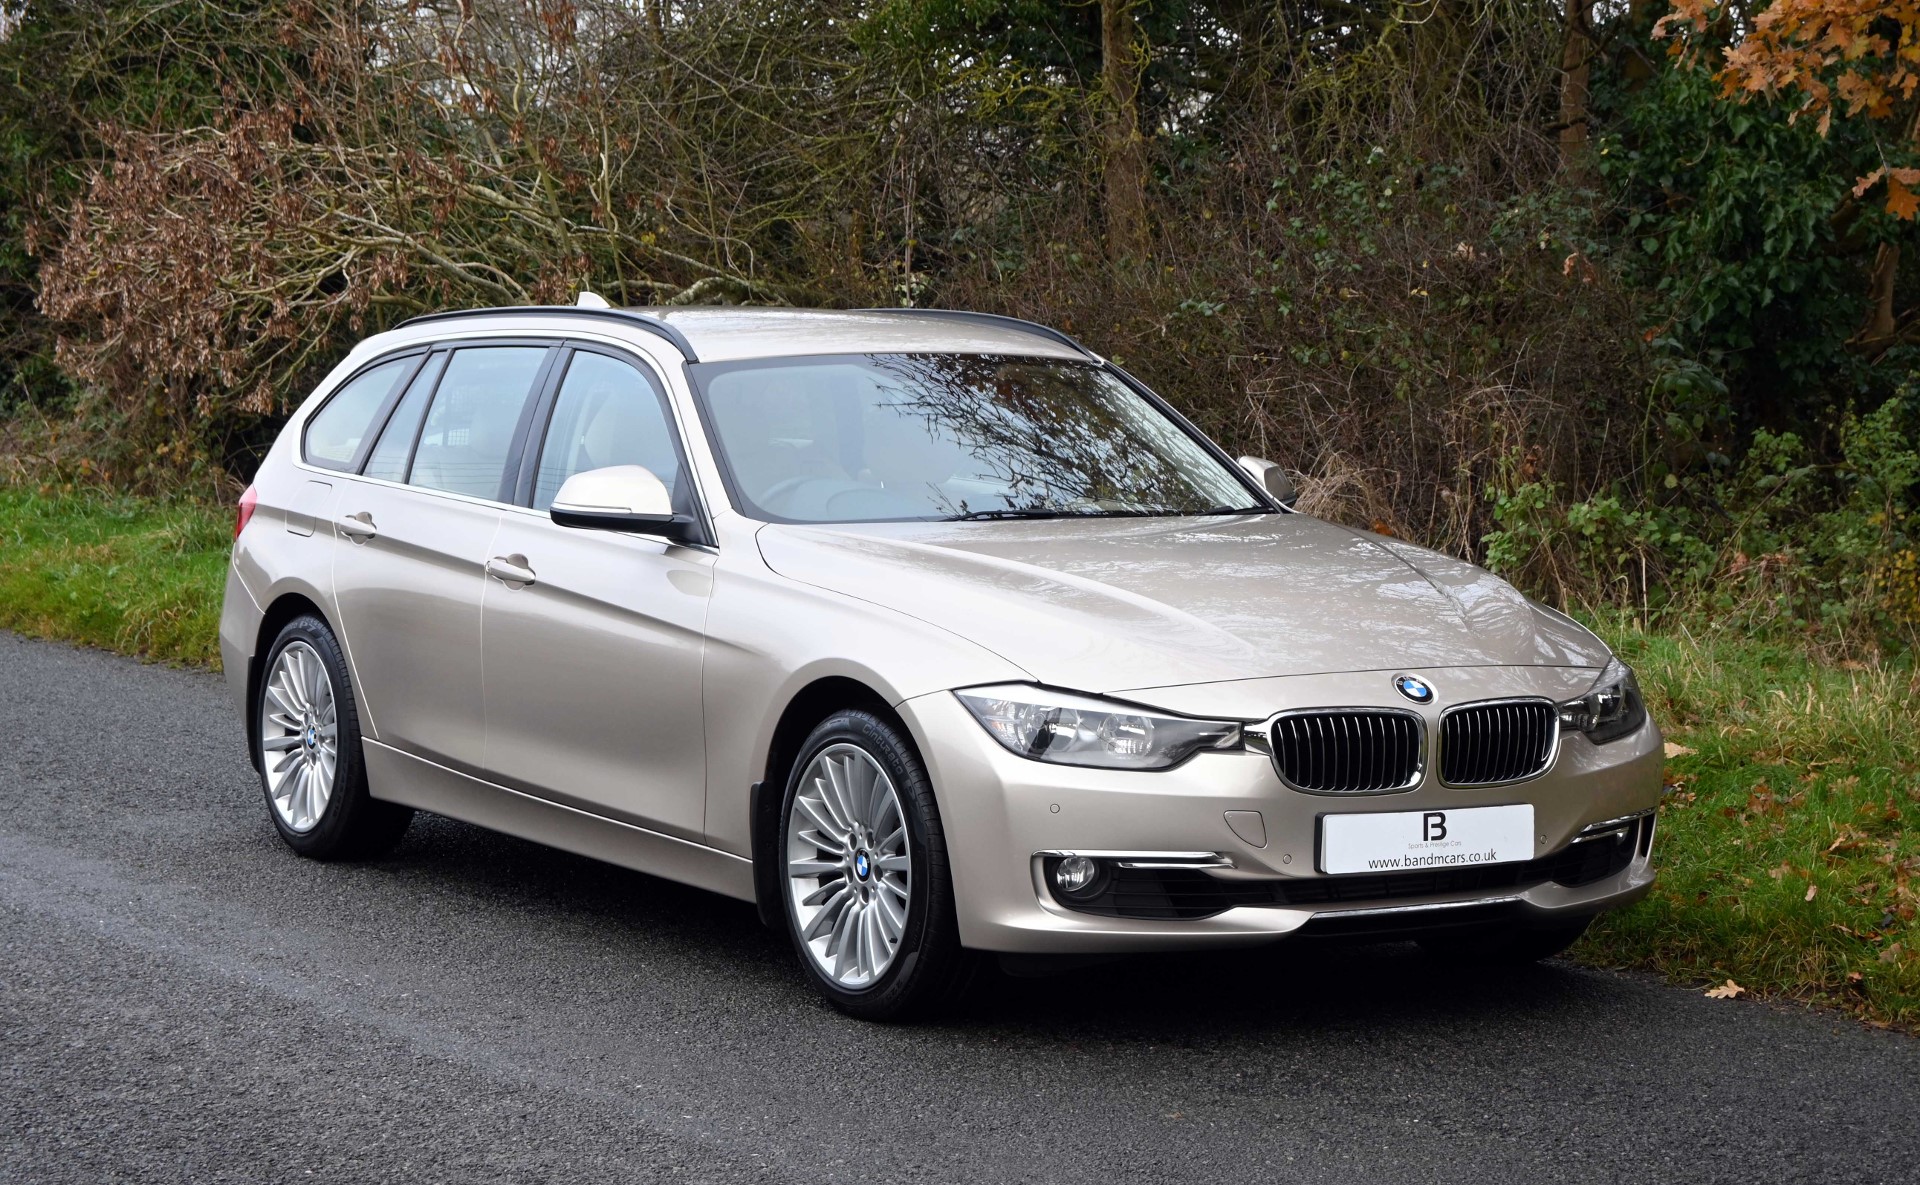 Used BMW 330d for sale in Warwickshire